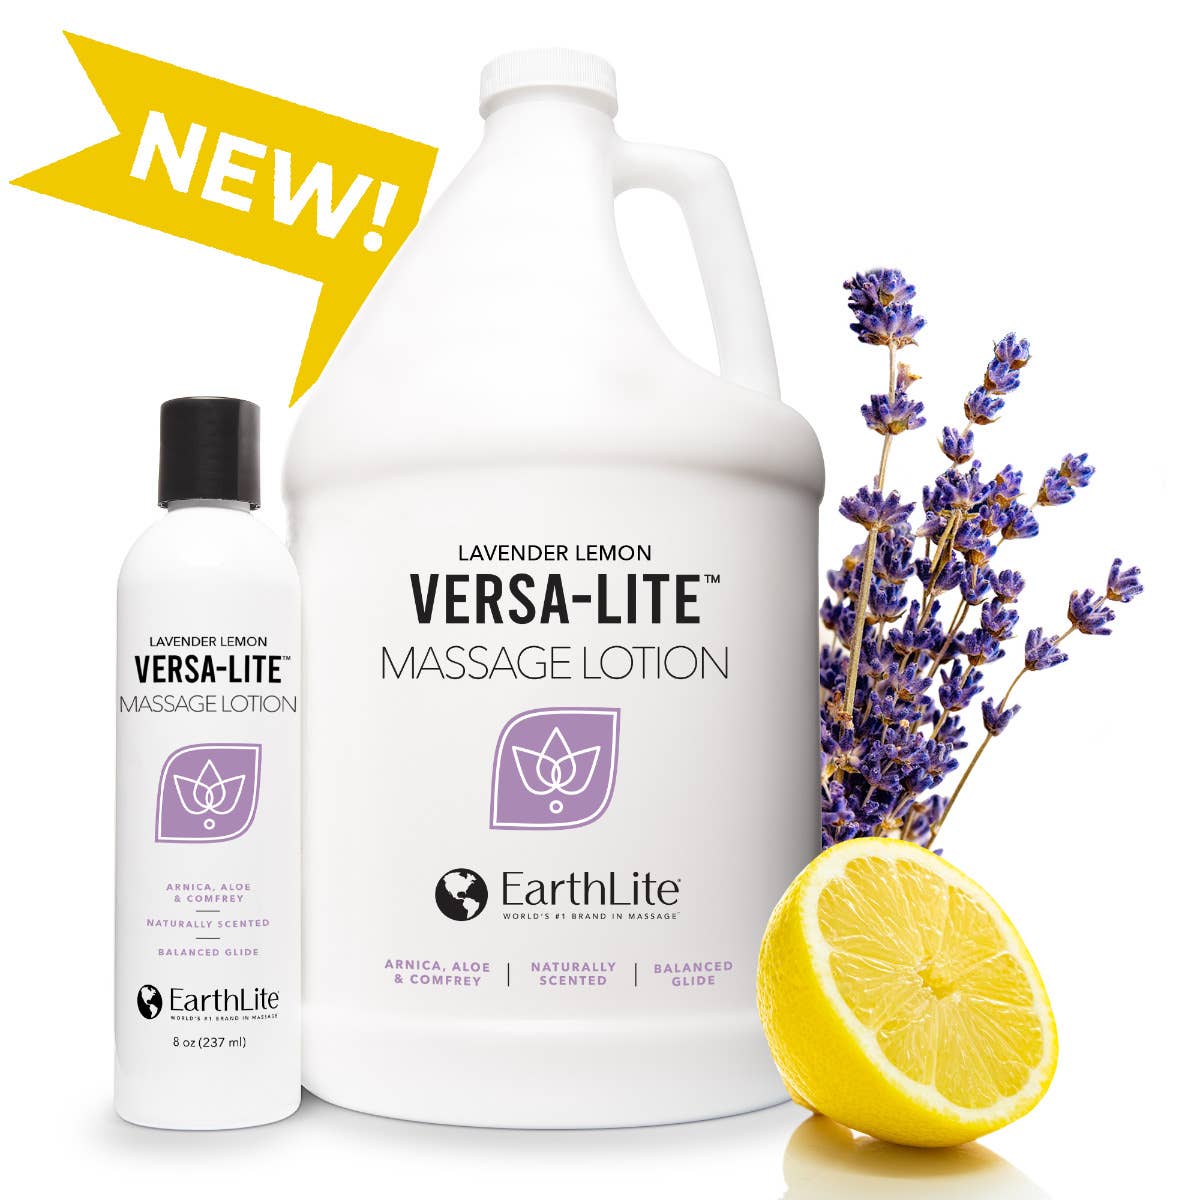 Versa-Lite massage lotion in 8oz and 1 gallon sizes.